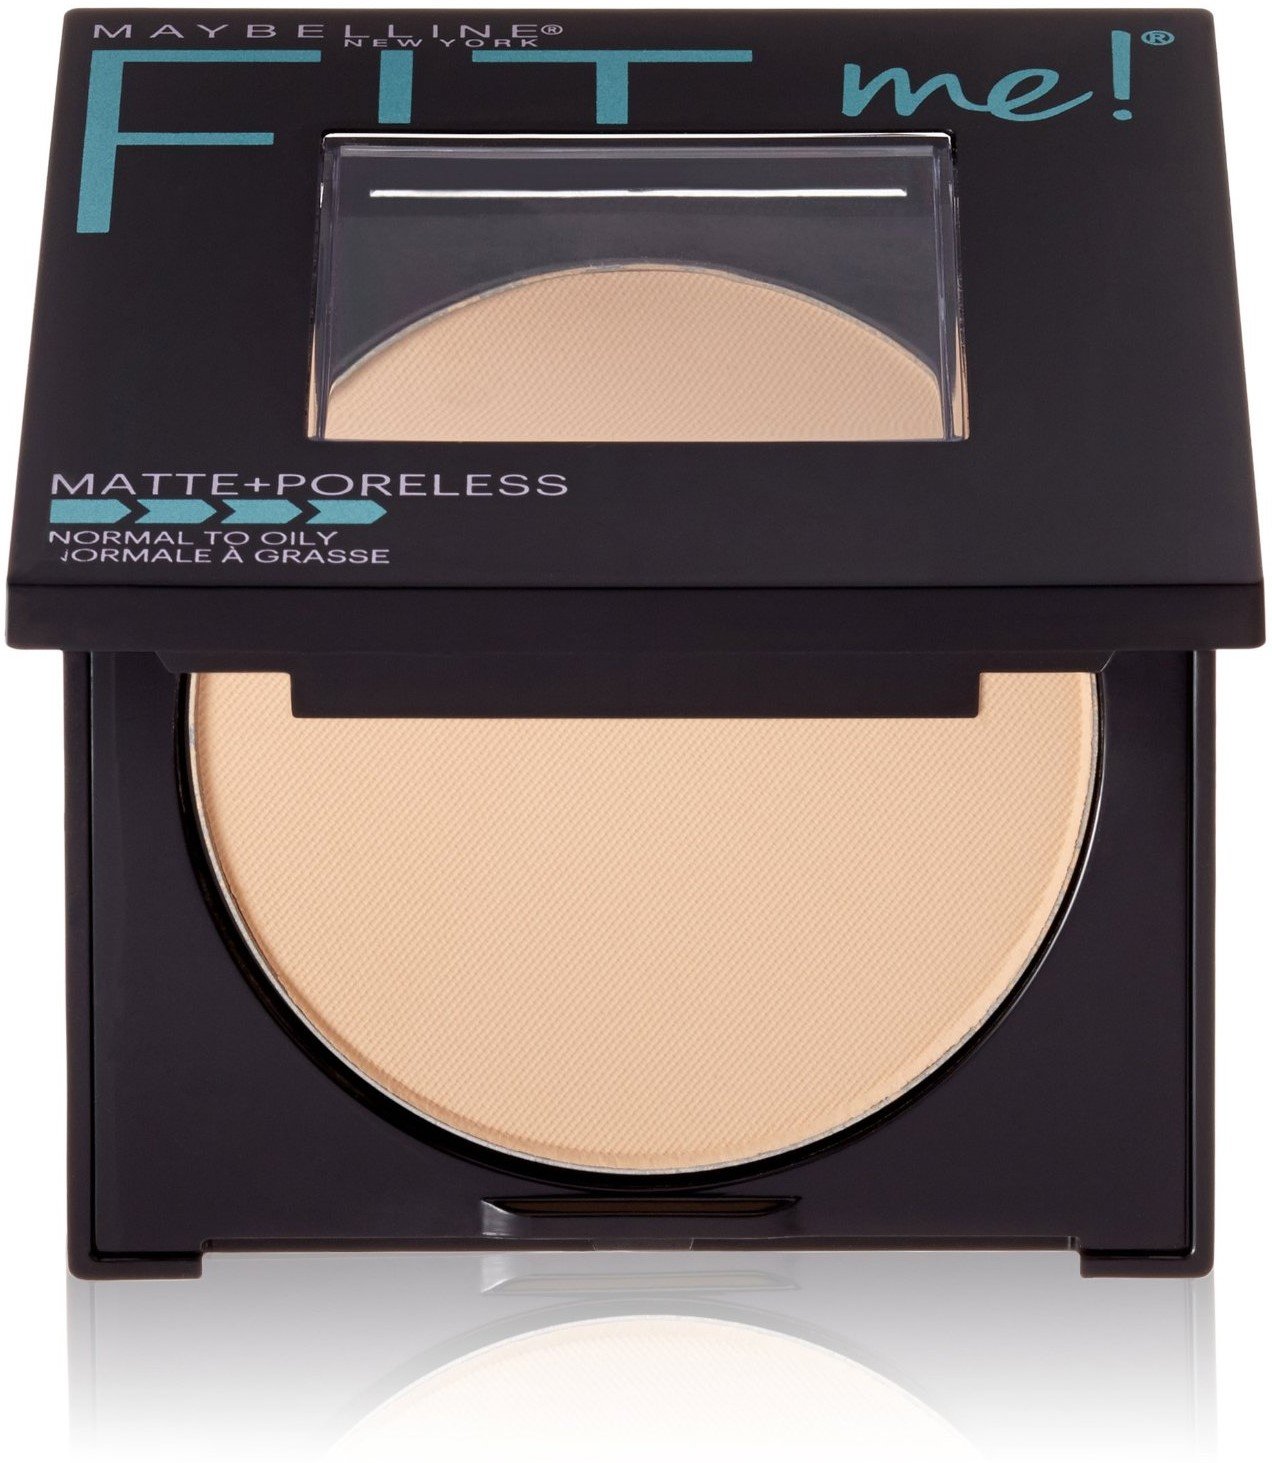 Maybelline New York Fit Me! Matte + Poreless Foundation Powder, Classic Ivory [120] 1 oz (Pack of 2)